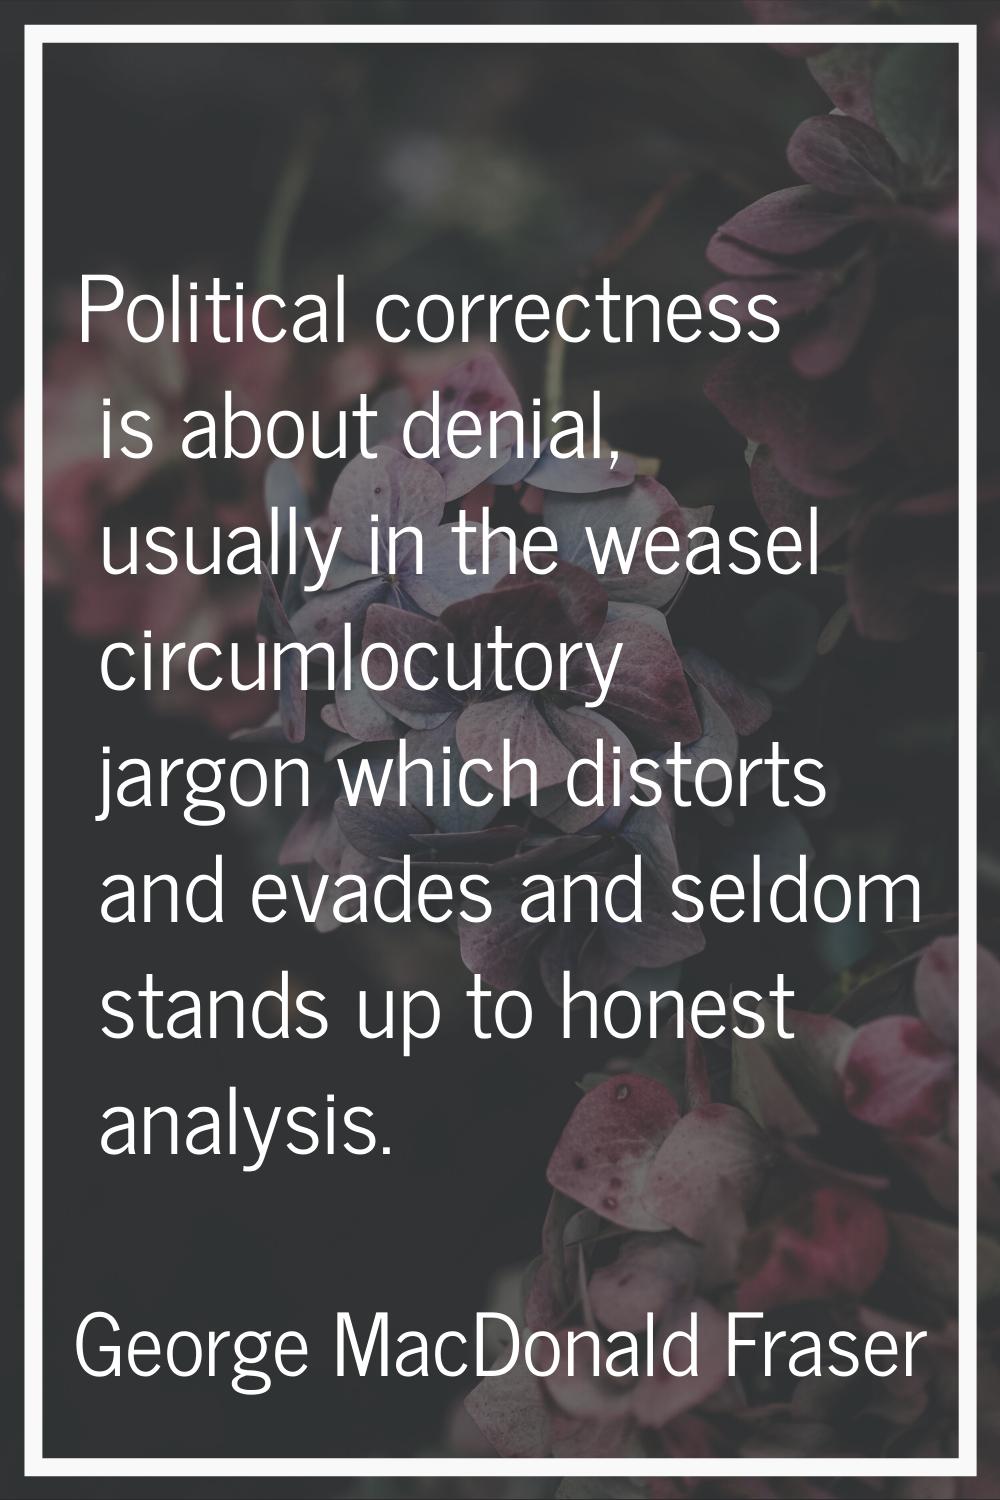 Political correctness is about denial, usually in the weasel circumlocutory jargon which distorts a